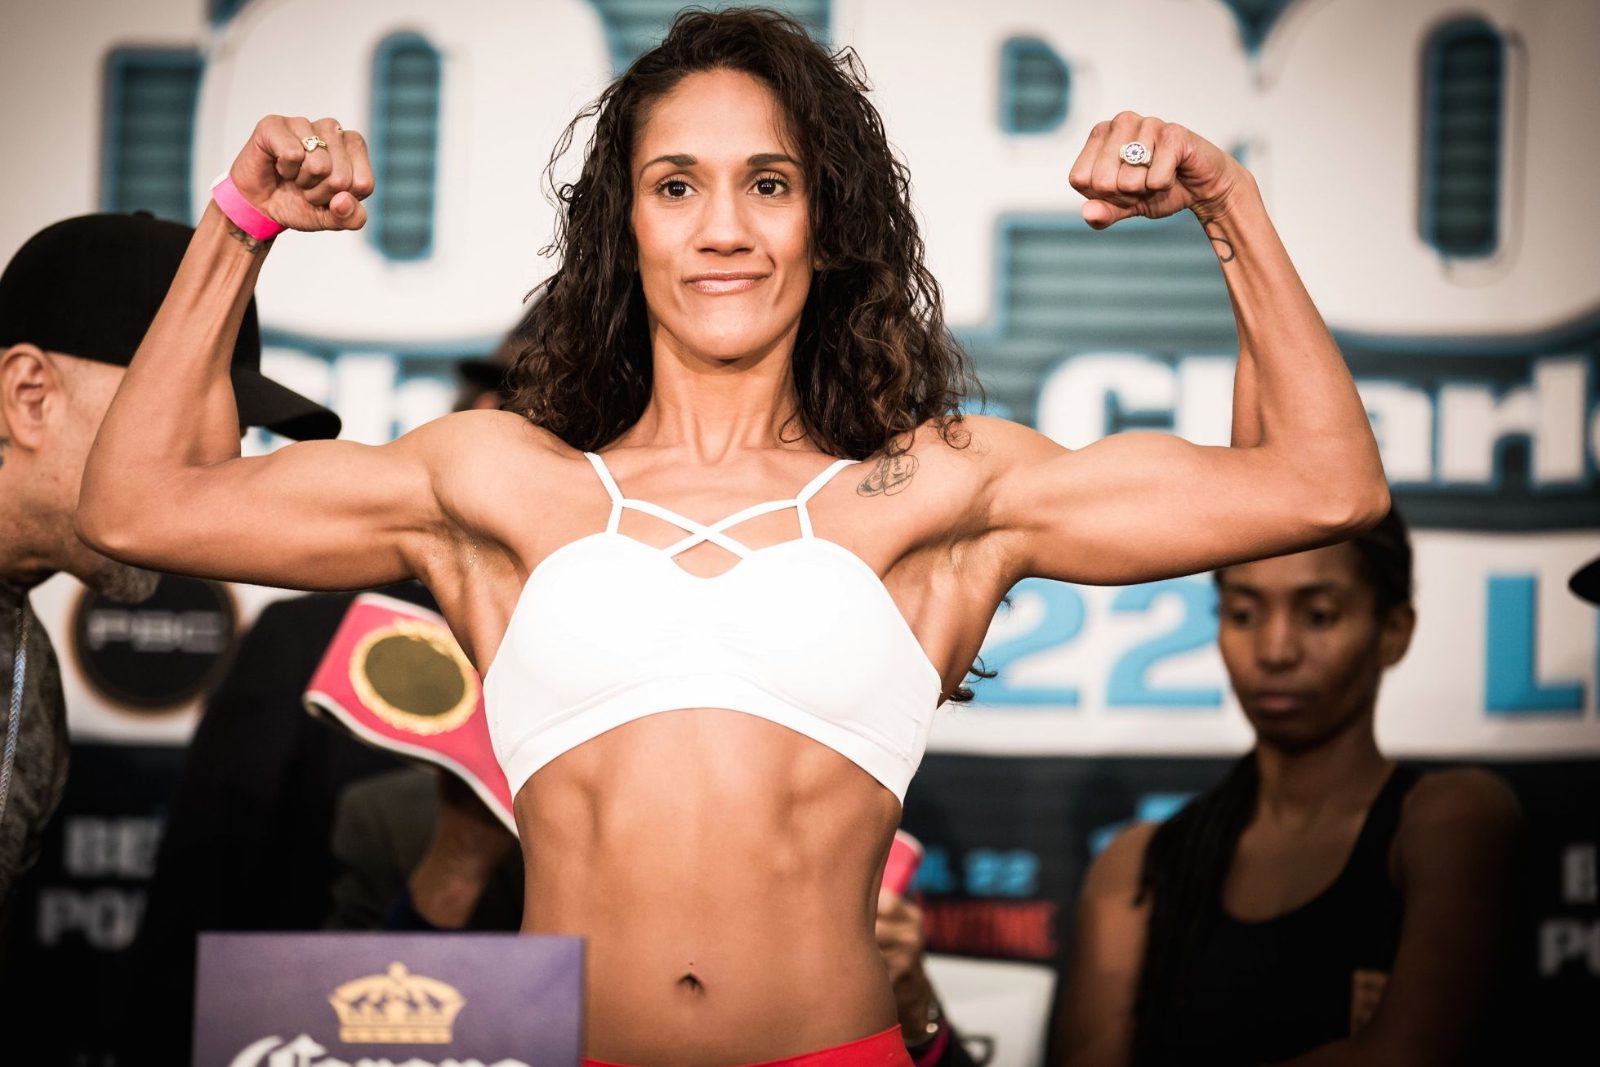 Amanda Serrano Aims To Break Stereotypes In Next Fight With 12 Three-Minute Rounds